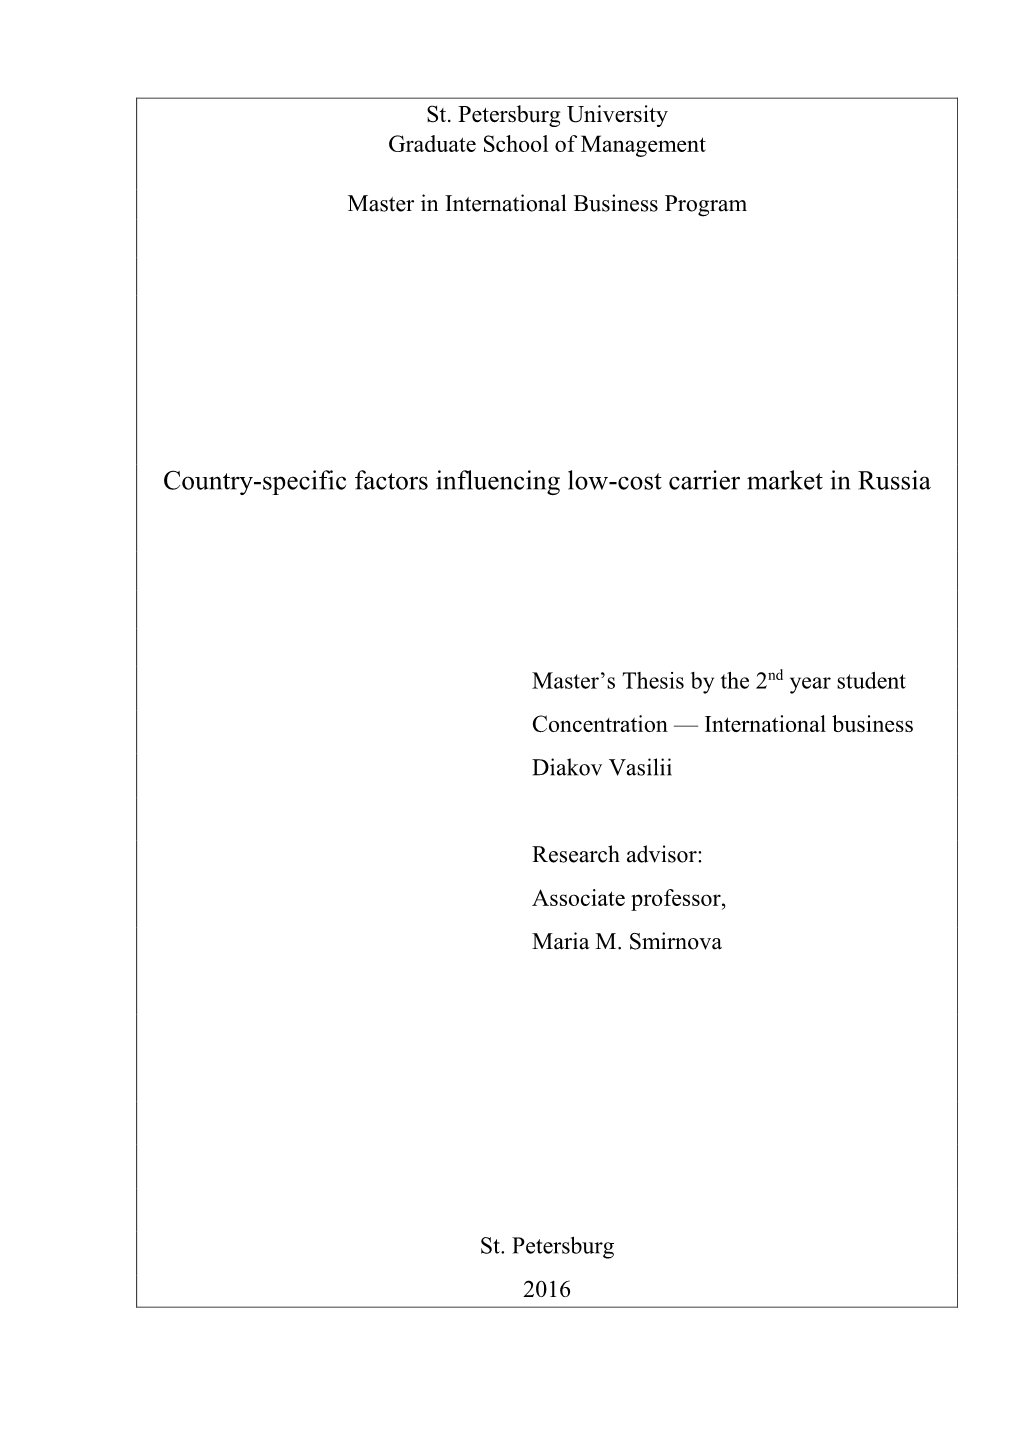 Сountry-Specific Factors Influencing Low-Cost Carrier Market in Russia